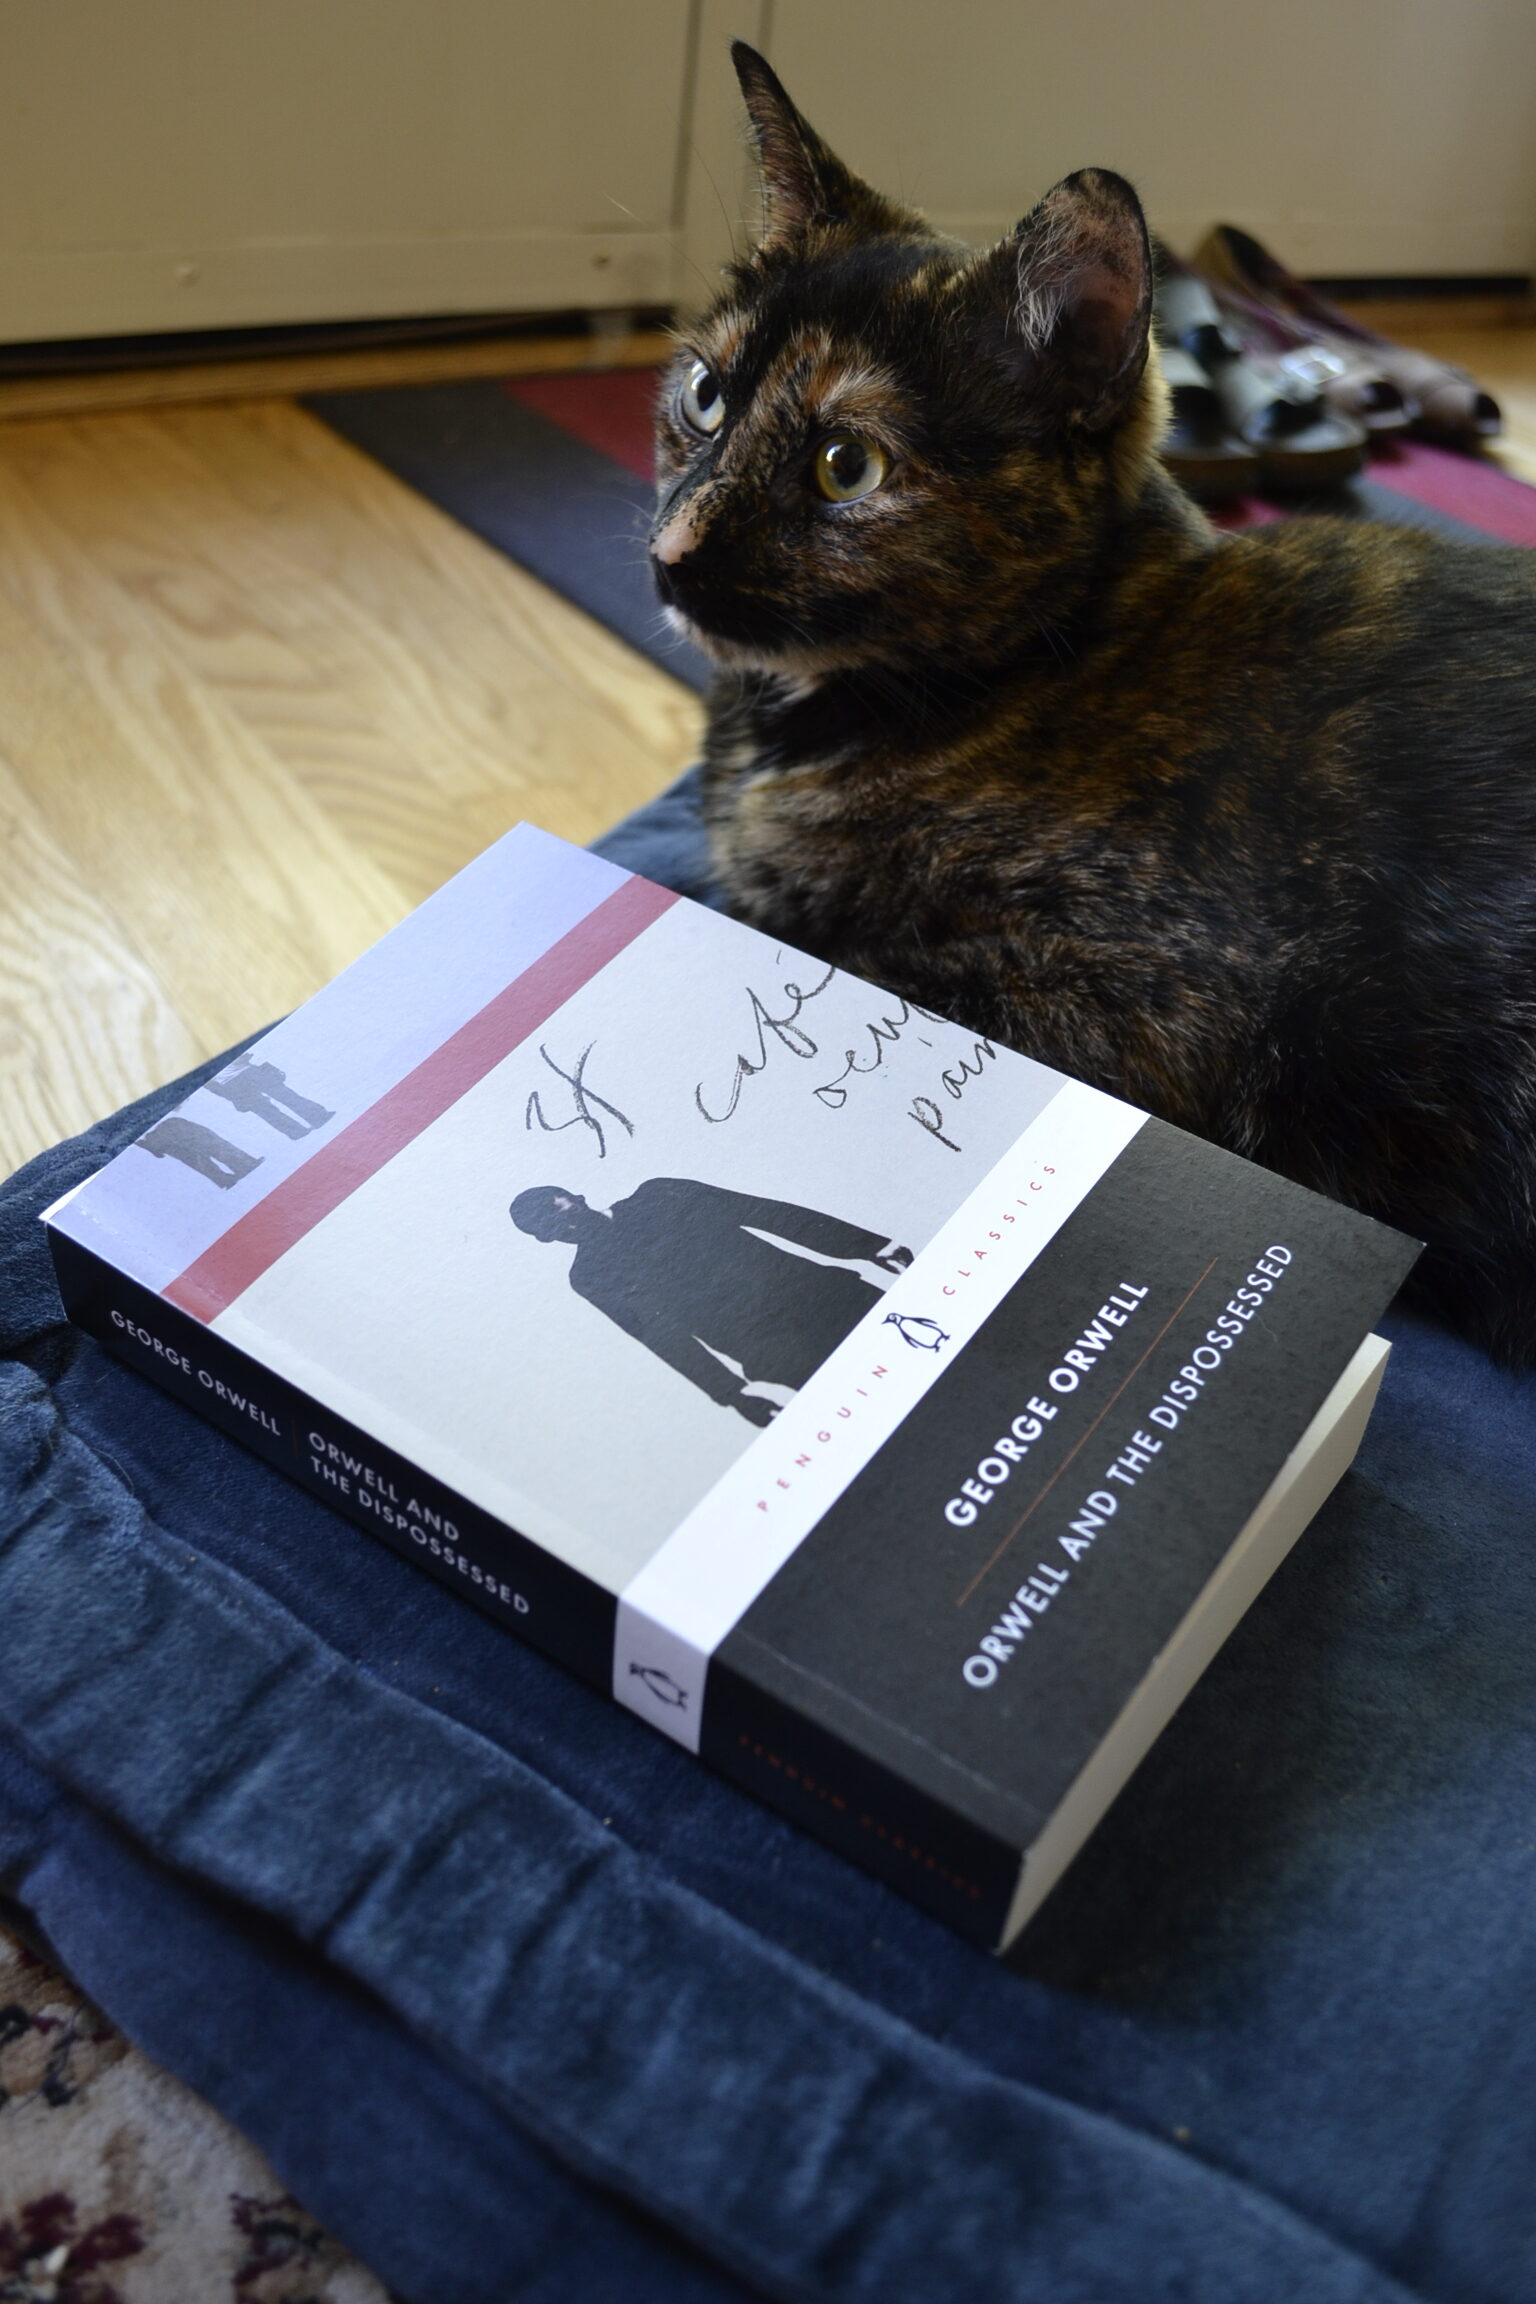 A tortoiseshell cat sits primly beside Orwell and the Dispossessed.